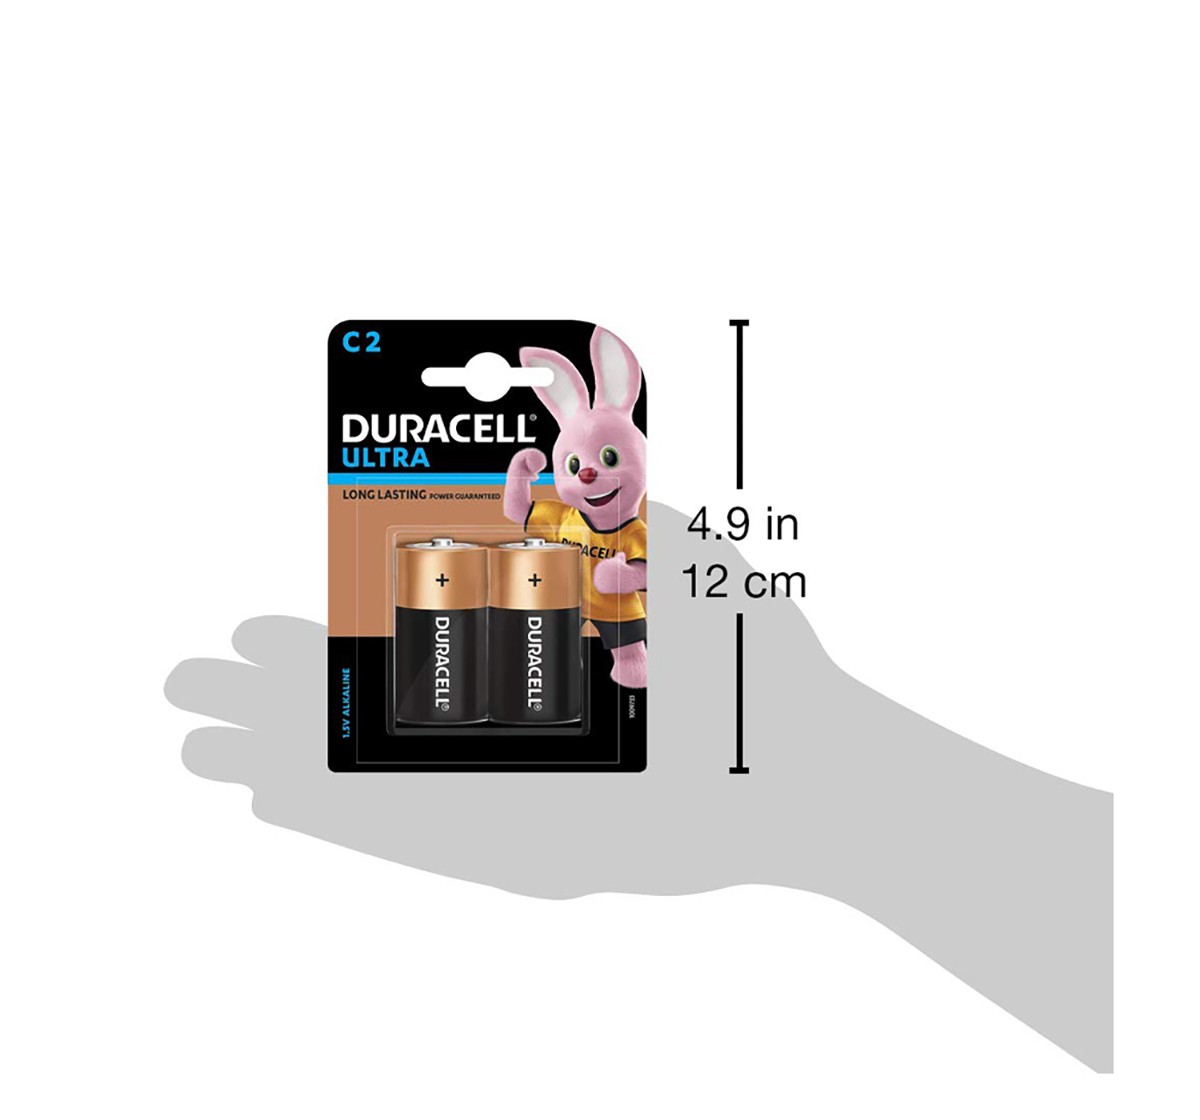 Duracell Ultra Alkaline C2 Battery (Pack Of 2) Essentials for Kids Age 5Y+ (Copper)